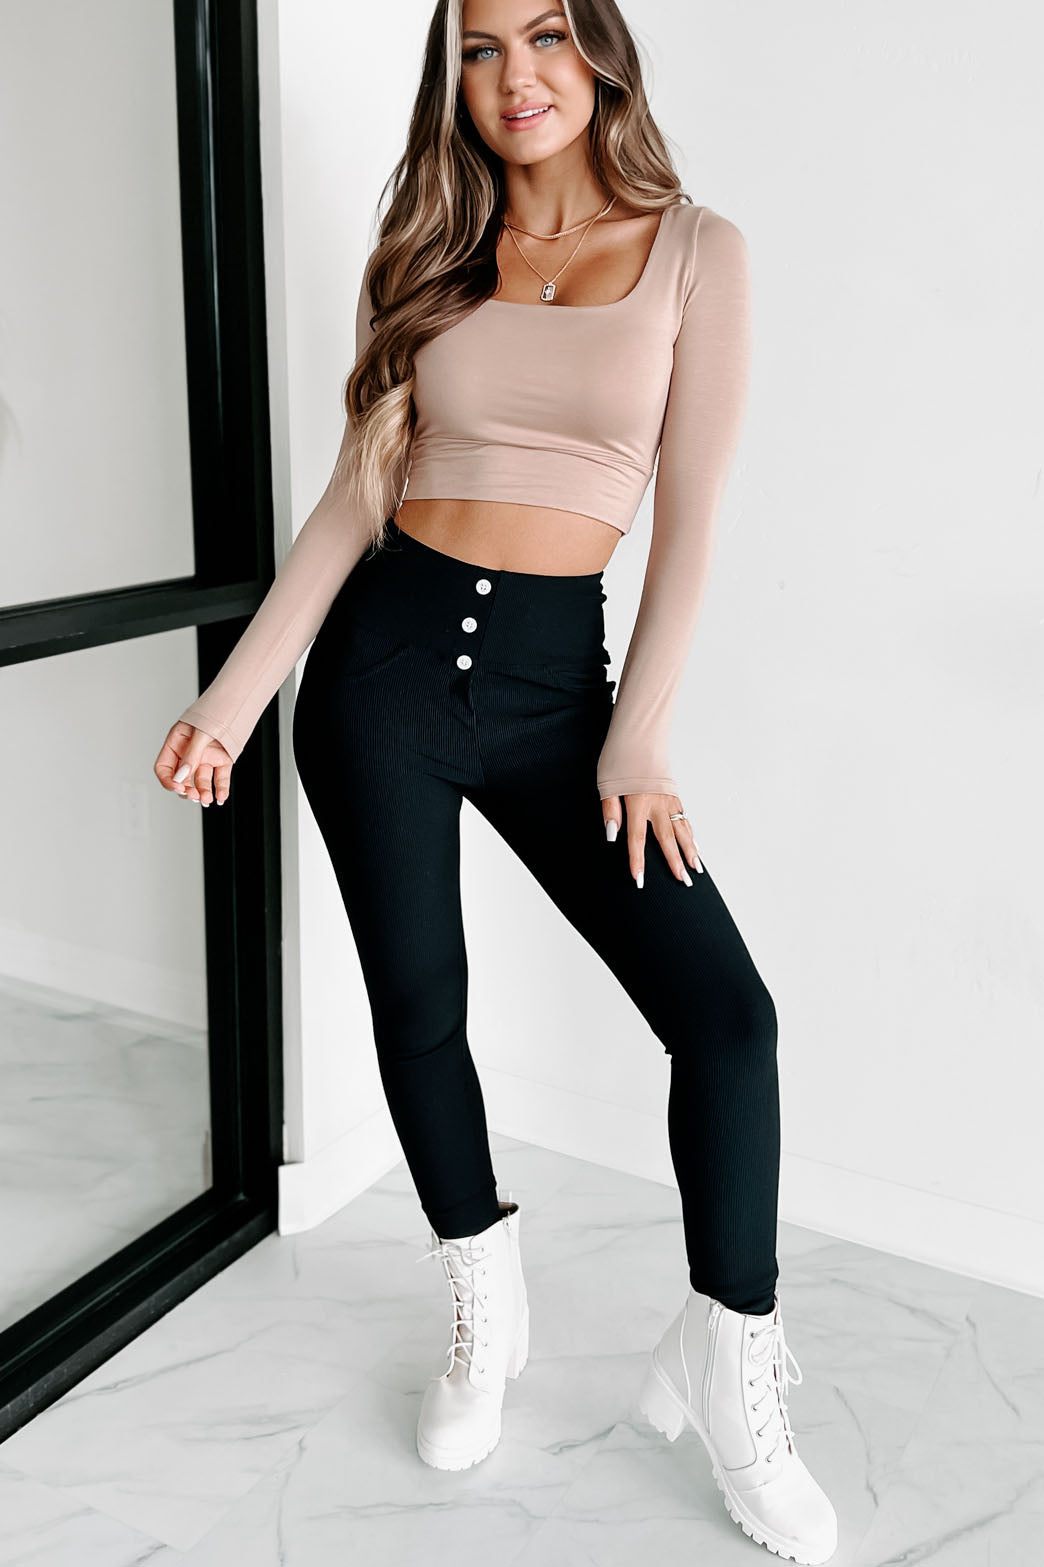 Glad You Stayed Square Neck Long Sleeve Crop Top (Tan) - NanaMacs